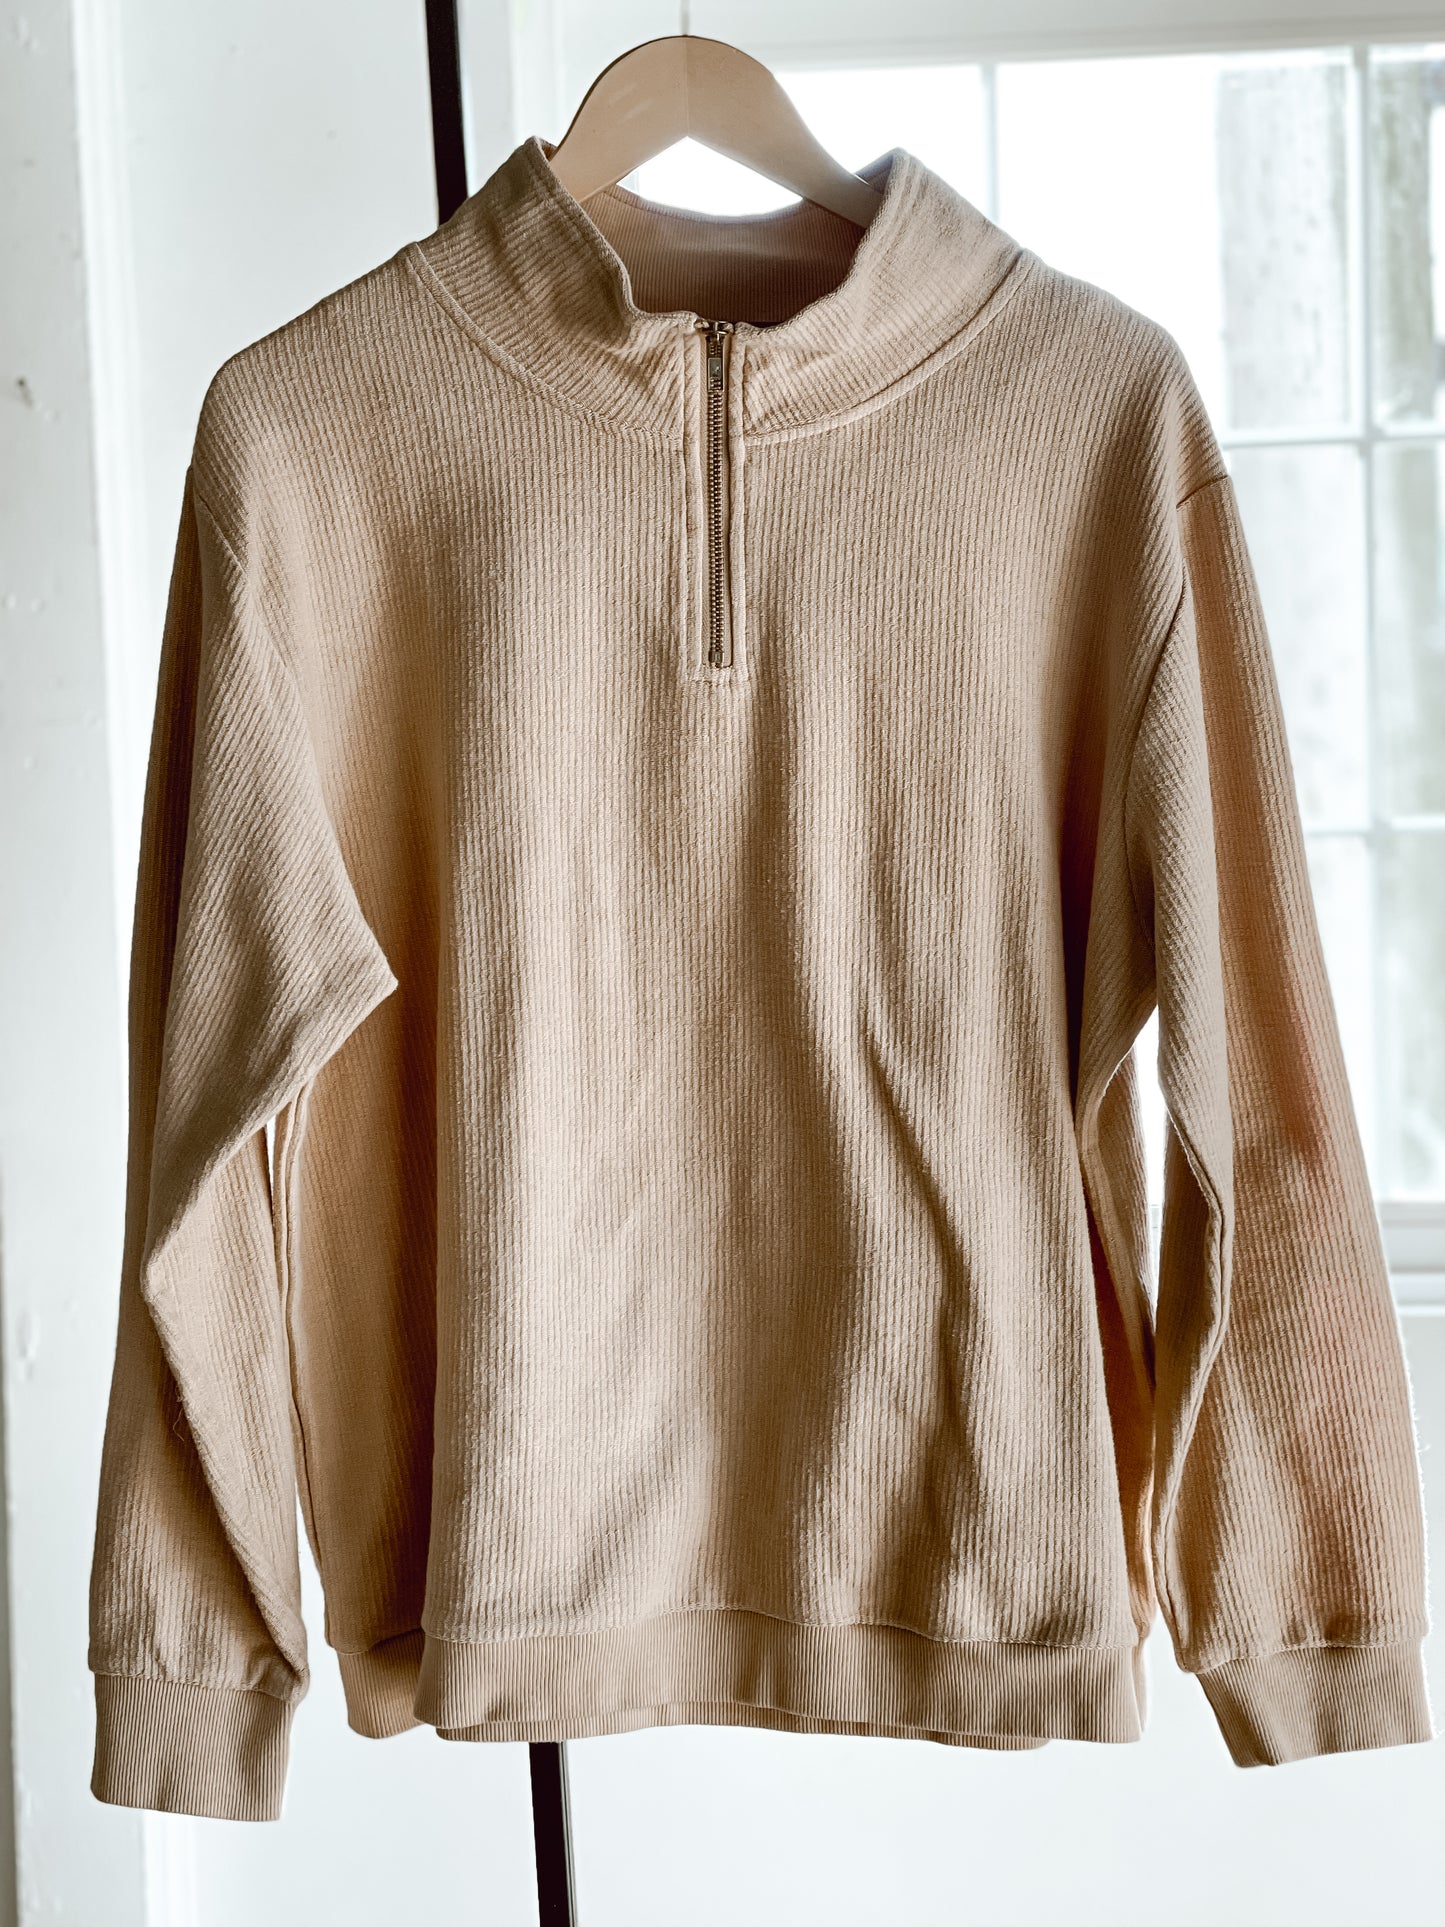 Sweater with quarter length zip